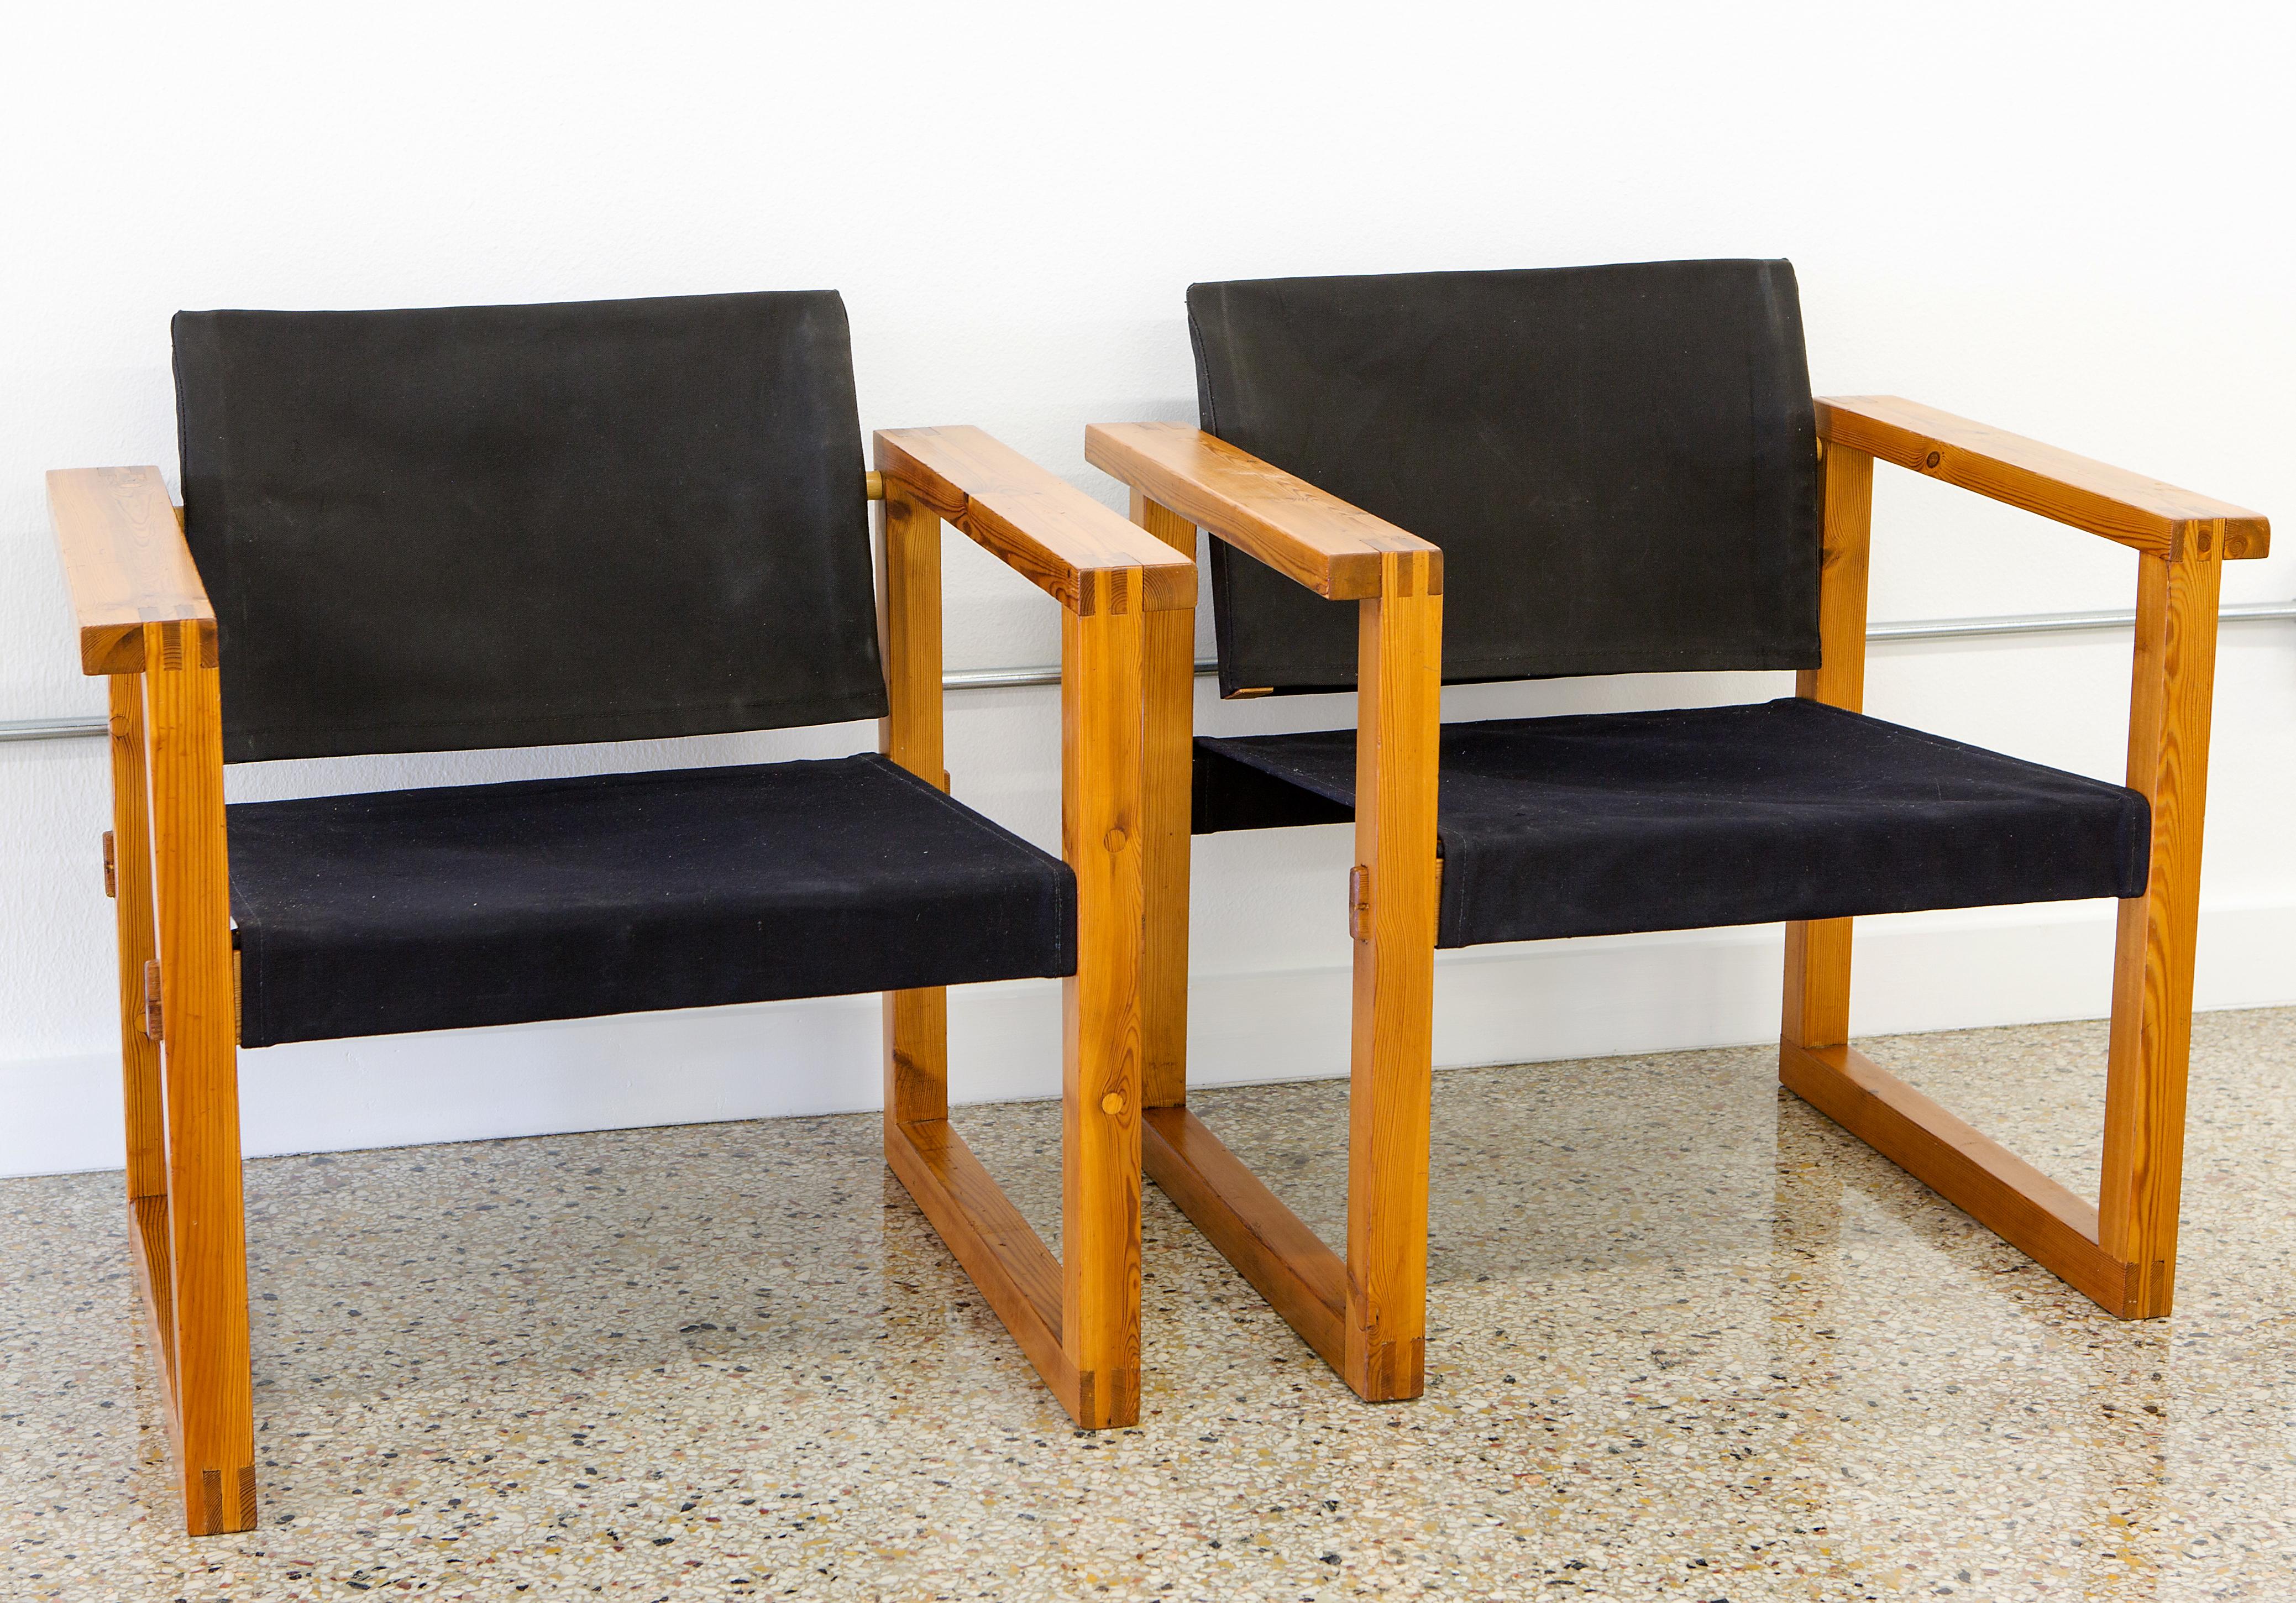 Pair of Finn Farmer safari / director's chairs. Reupholstered in slingback black canvas, circa 1960s. Richly grained pine frame dovetailed for support, sturdiness and as a design element. Back rest pivots on its steel frame to adjust for maximum